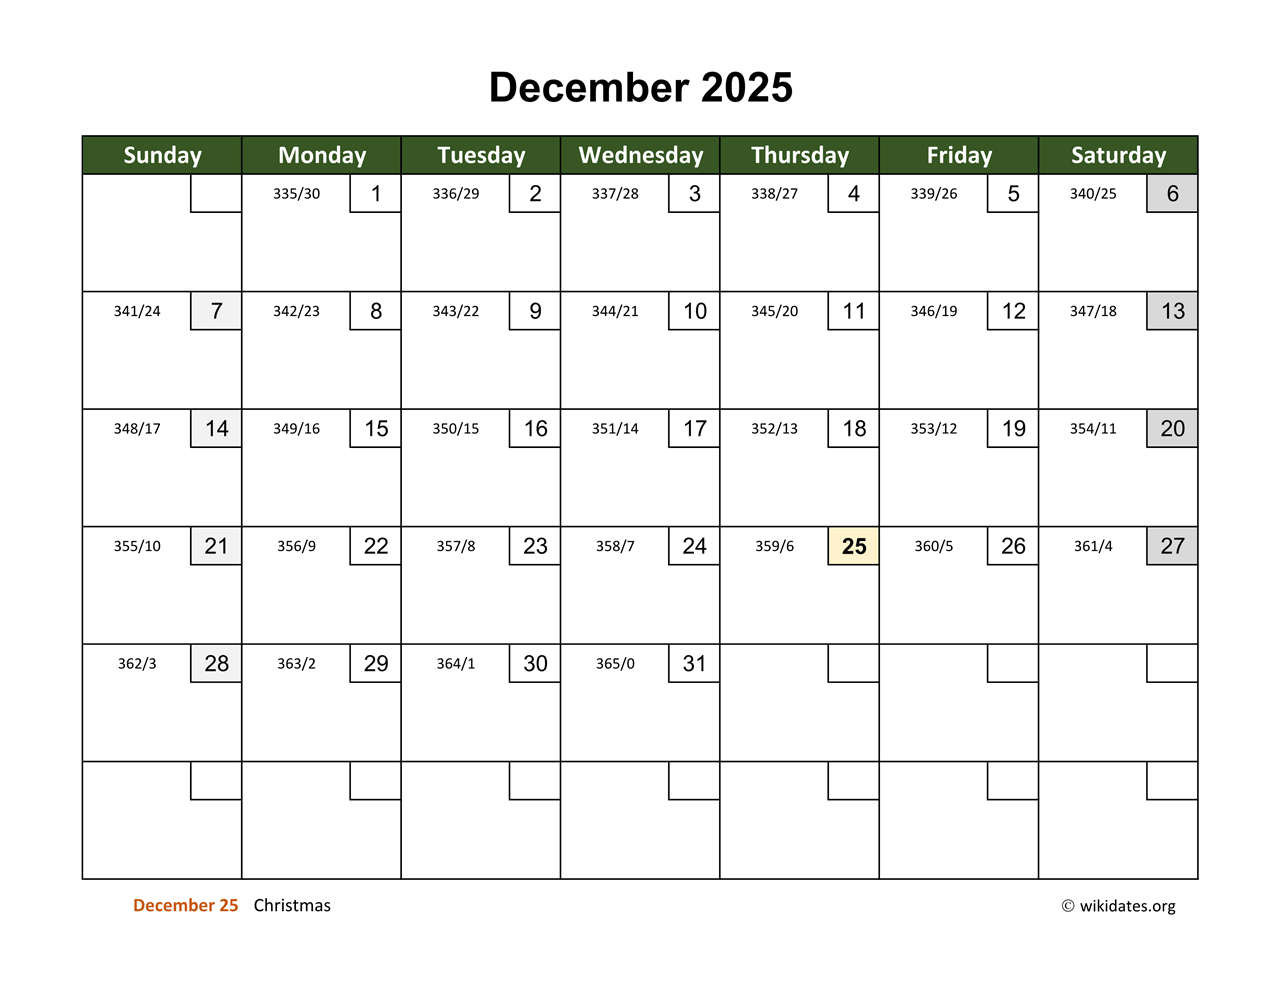 december-2025-calendar-with-day-numbers-wikidates